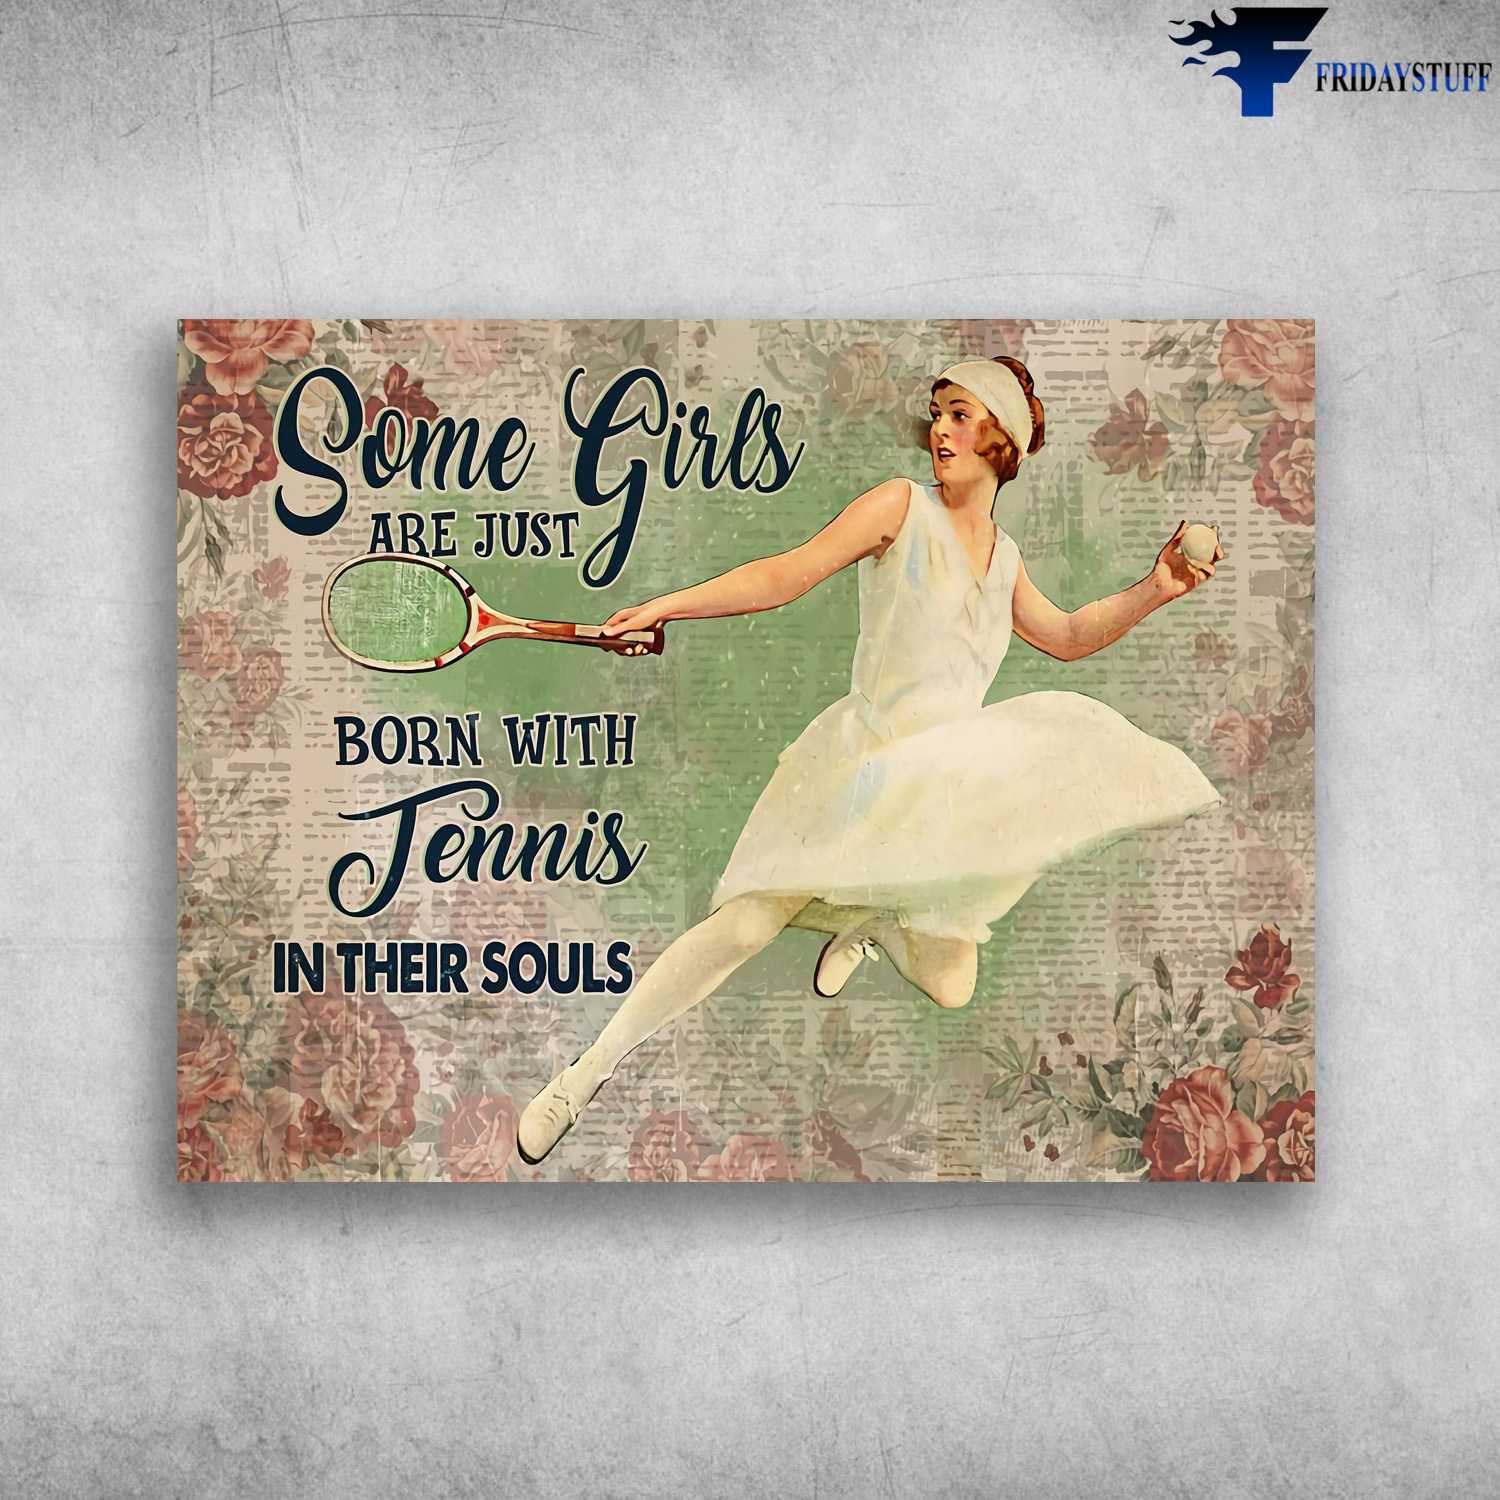 Tennis Girl, Tennis Poster - Some Girls Are Just Born With, Tennis In Their Souls